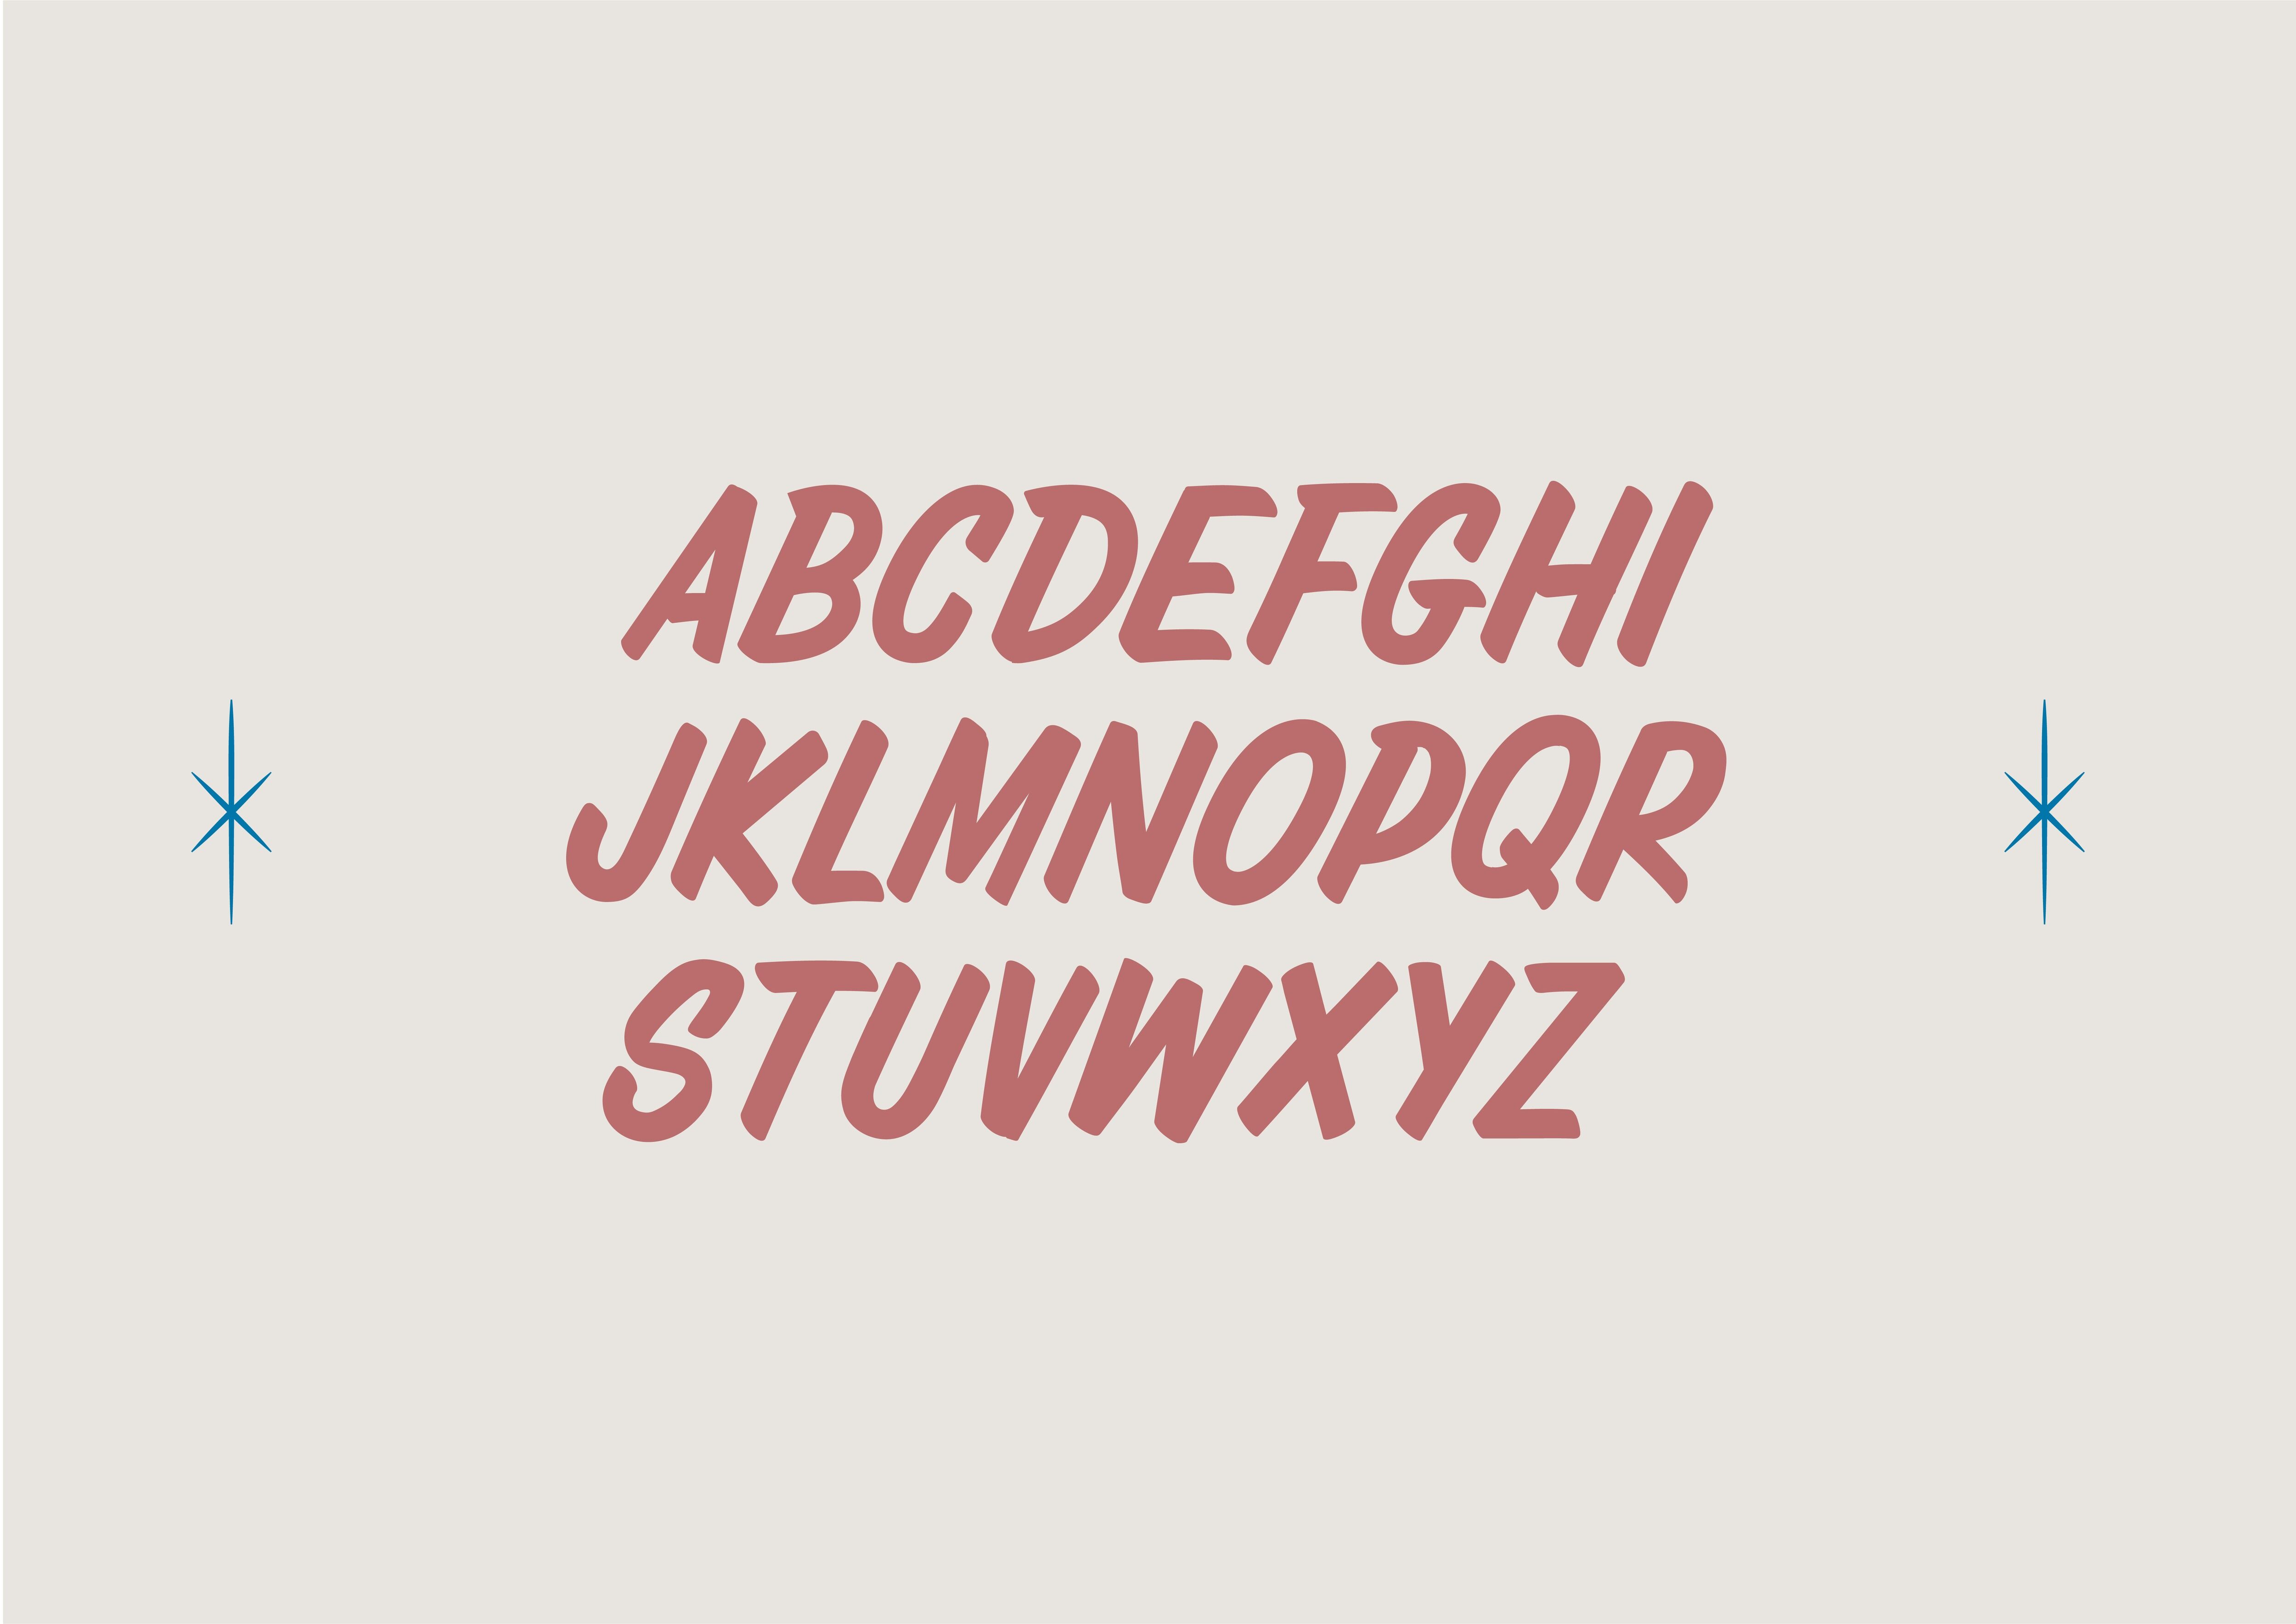 Stylized pink alphabet set with a minimalist cream background and two blue asterisks.